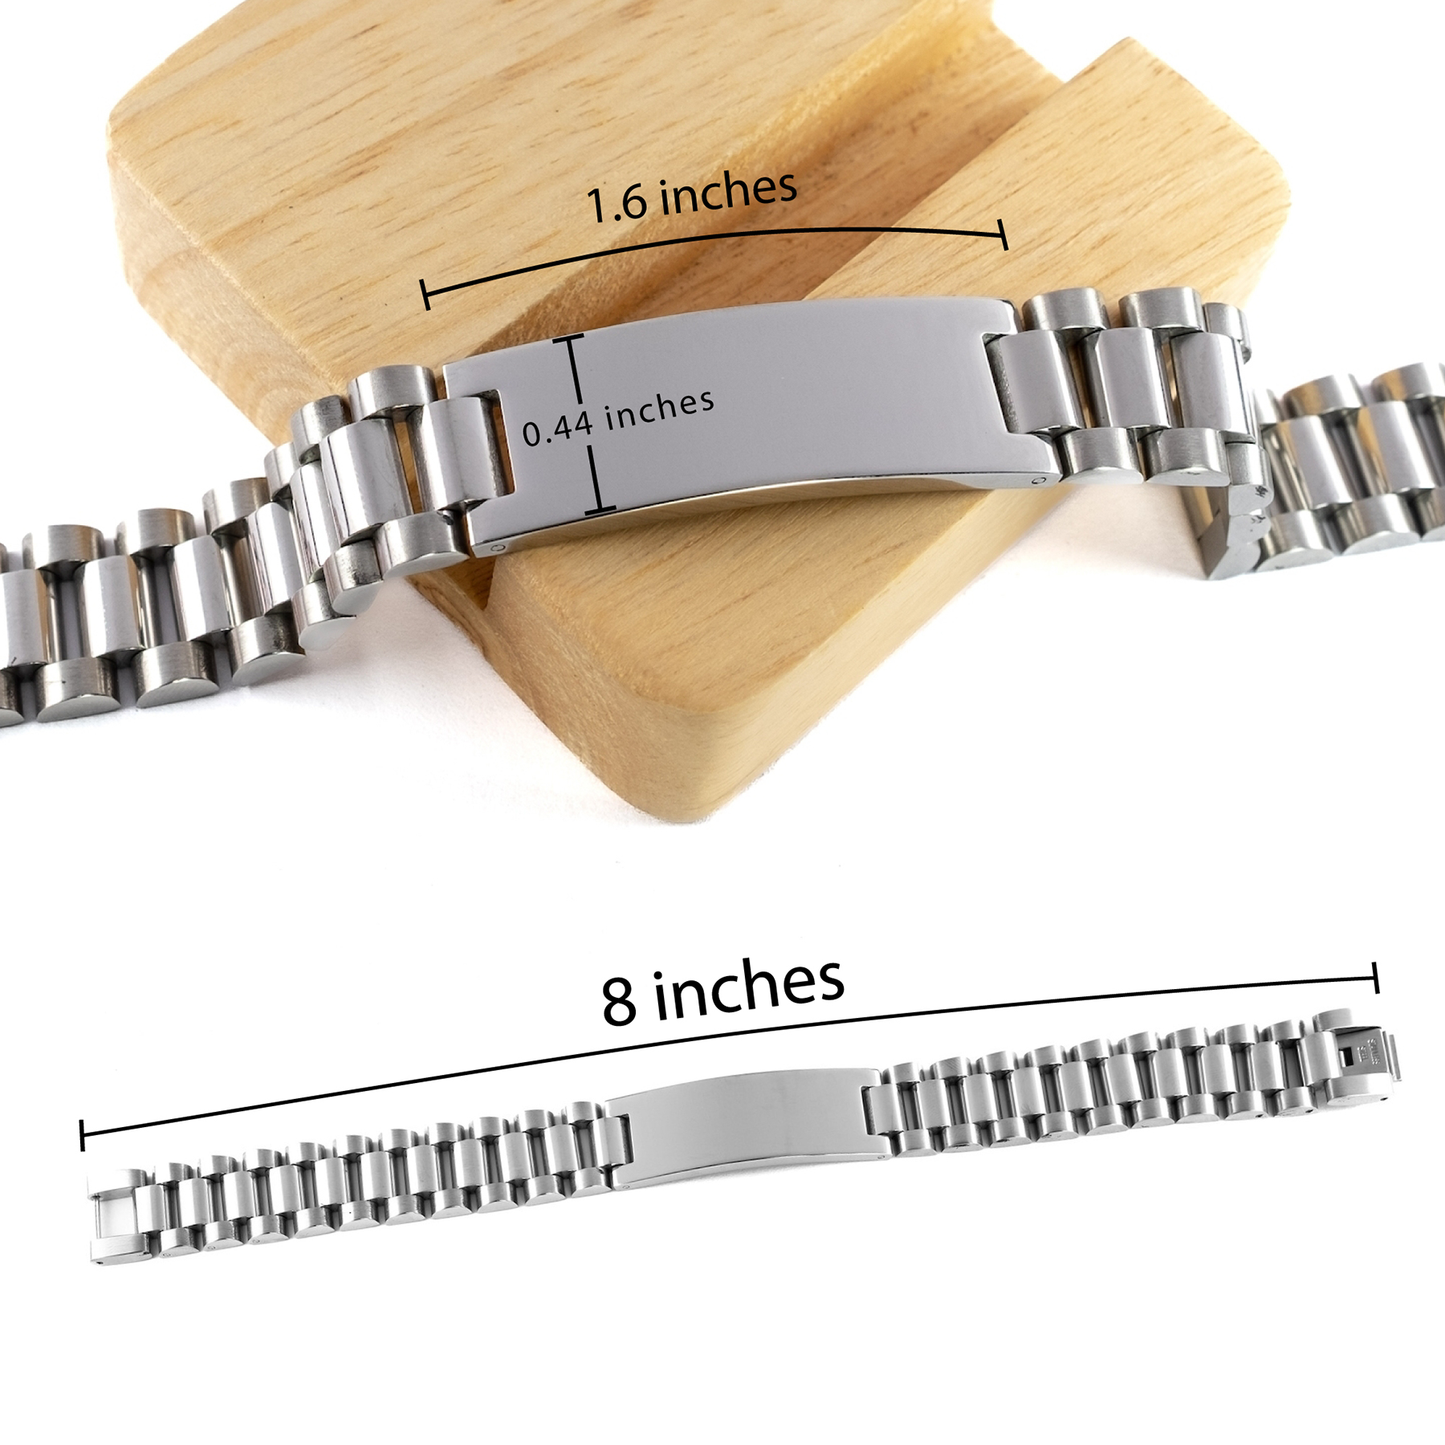 Granddaughter Motivational Gifts from Grandma, Remember to never give up no matter what, Inspirational Birthday Ladder Stainless Steel Bracelet for Granddaughter